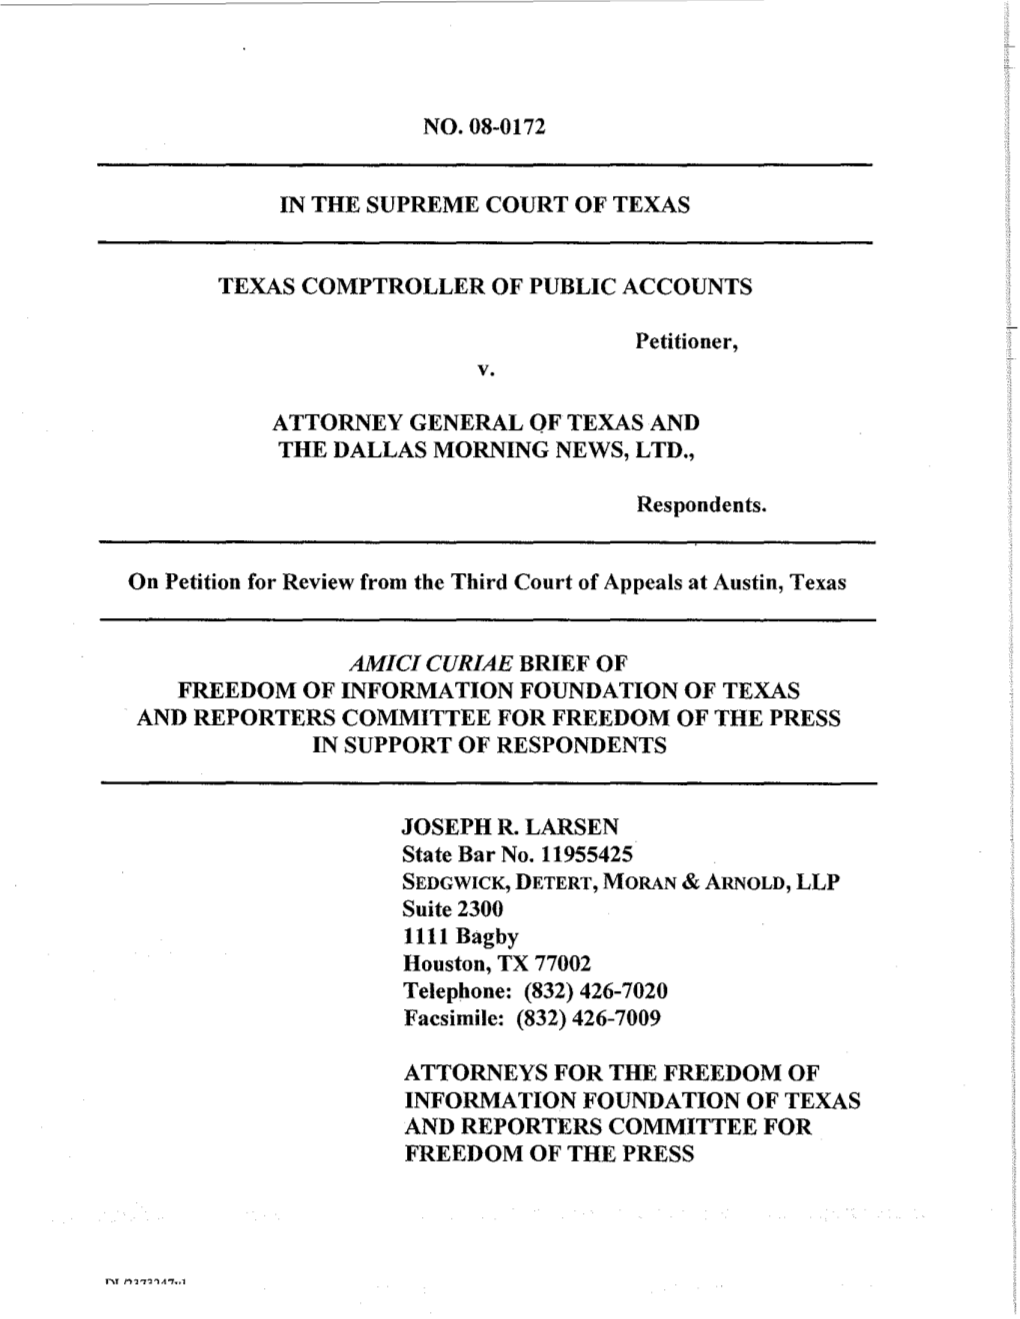 No. 08-0172 in the Supreme Court of Texas Texas